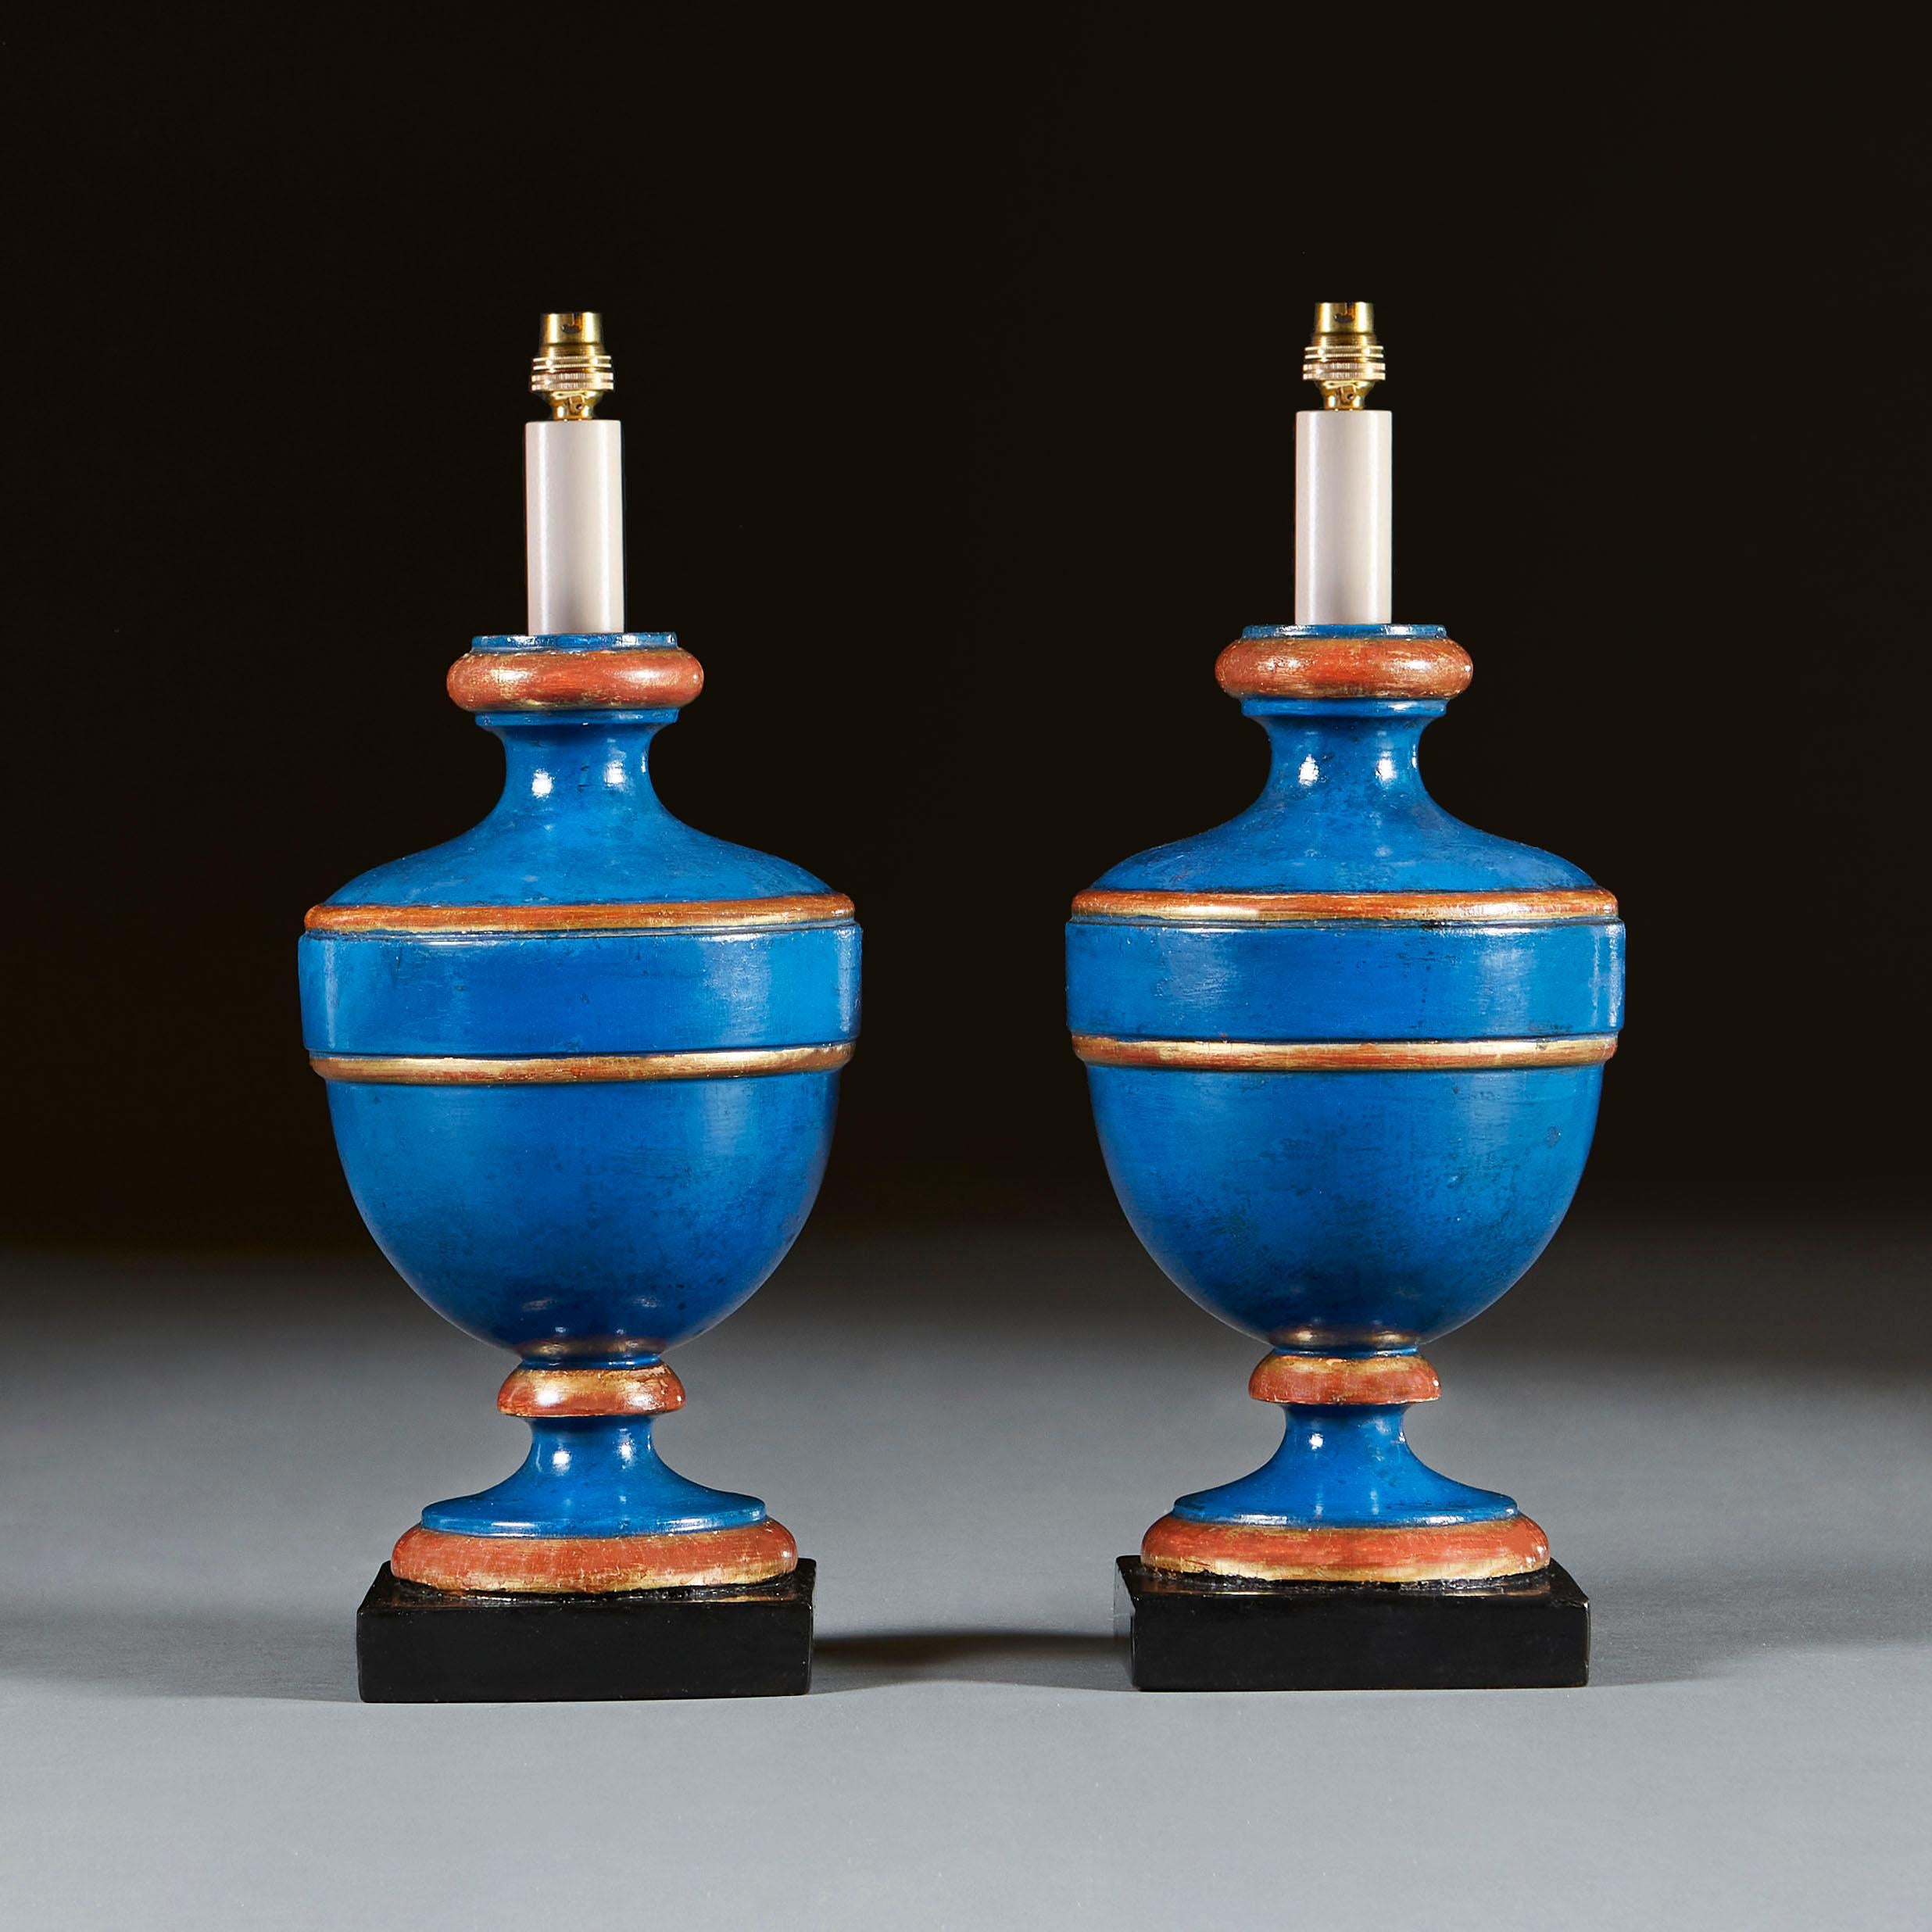 A pair of late nineteenth century baluster candlestick lamps, with blue painted ground throughout, with gilt bands, all supported on ebonised square plinths.